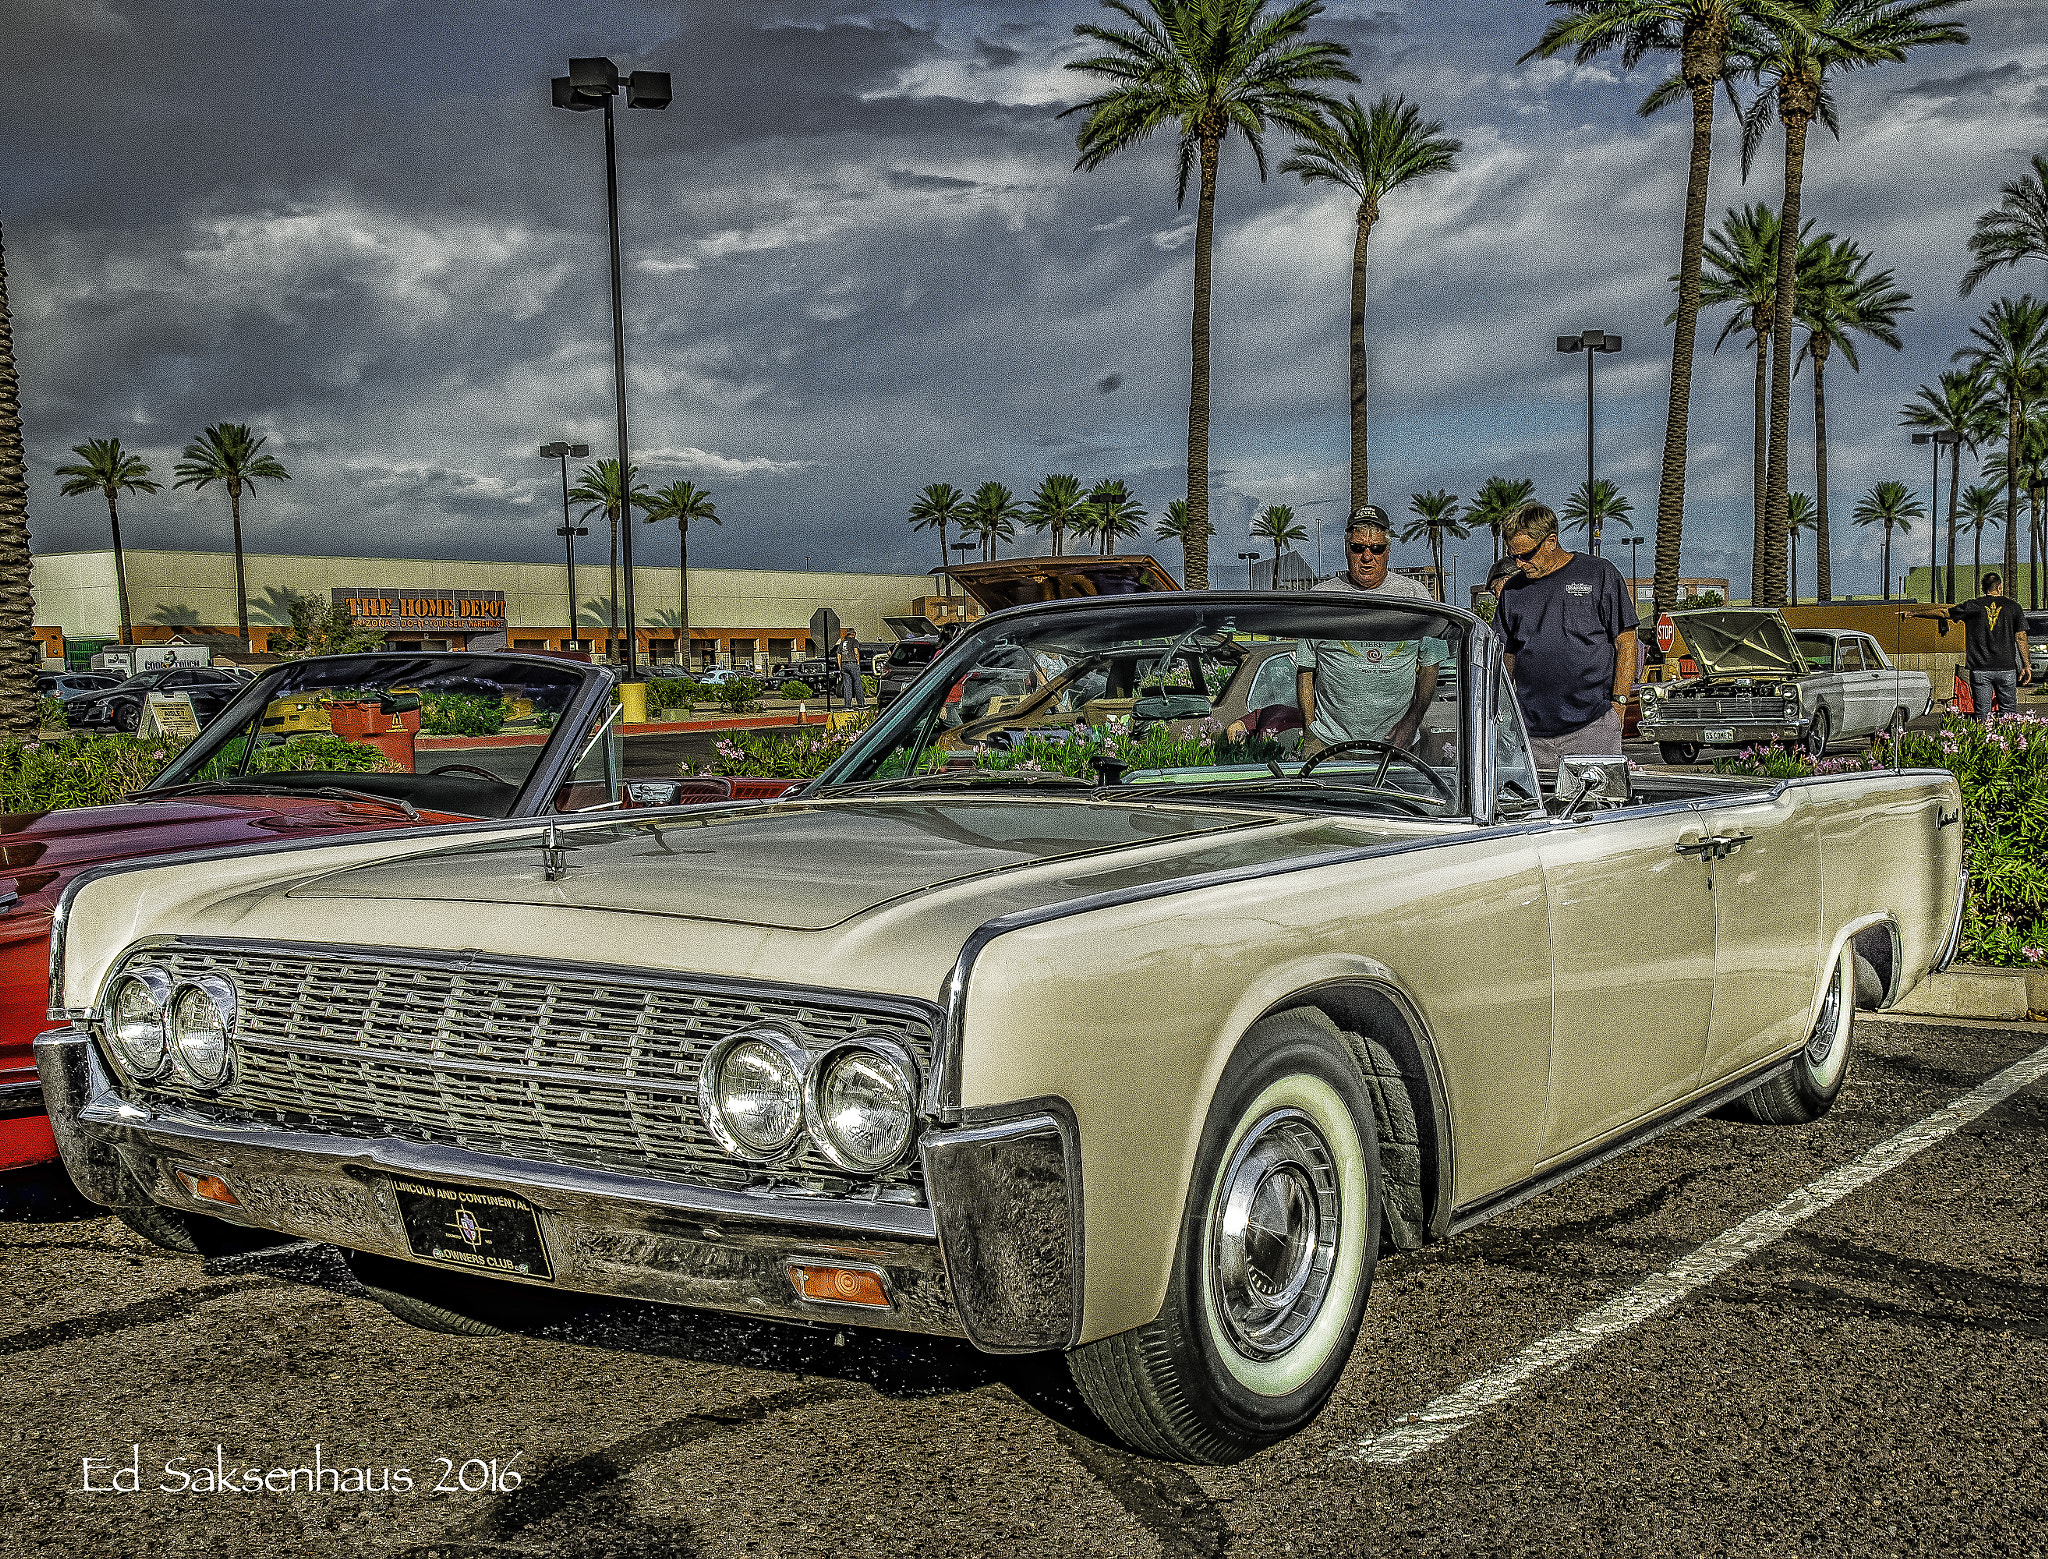 Nikon D800 + AF Zoom-Nikkor 24-120mm f/3.5-5.6D IF sample photo. Lincoln continental at car show photography